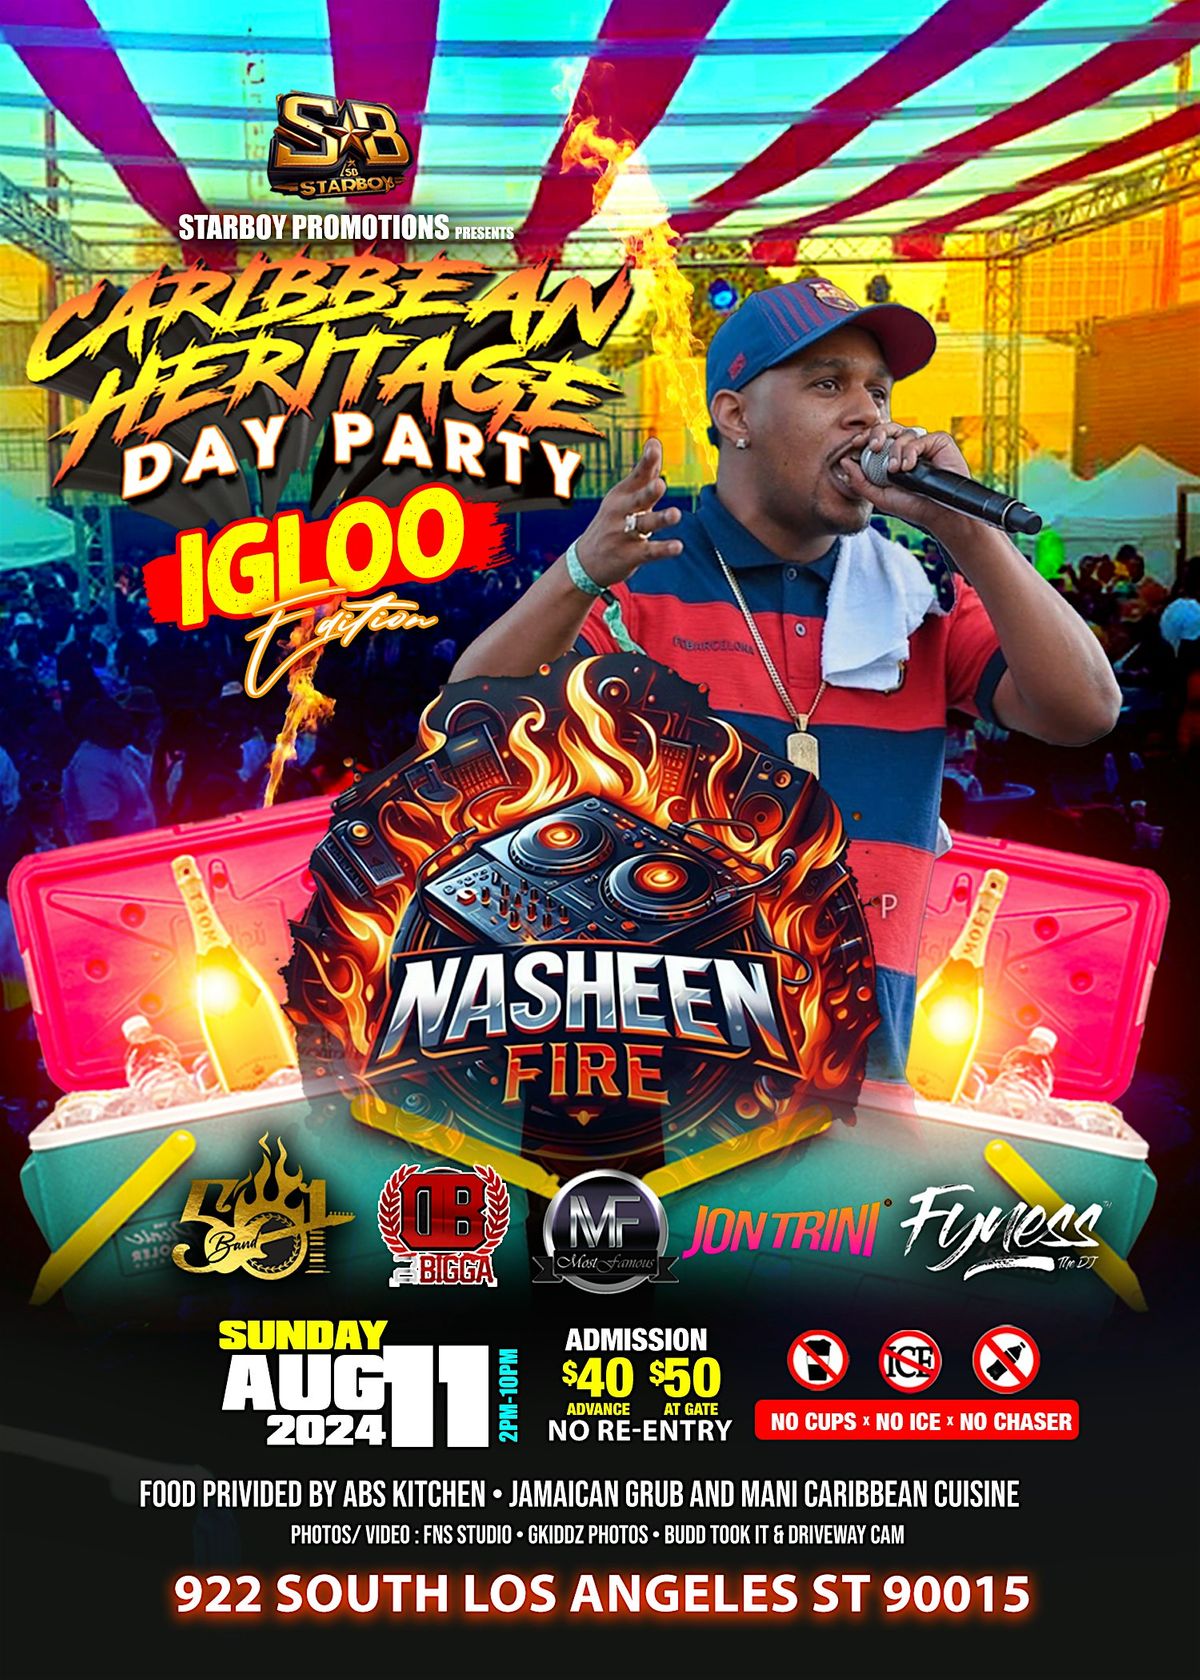 Caribbean Heritage Day Party "IGLOO EDITION"